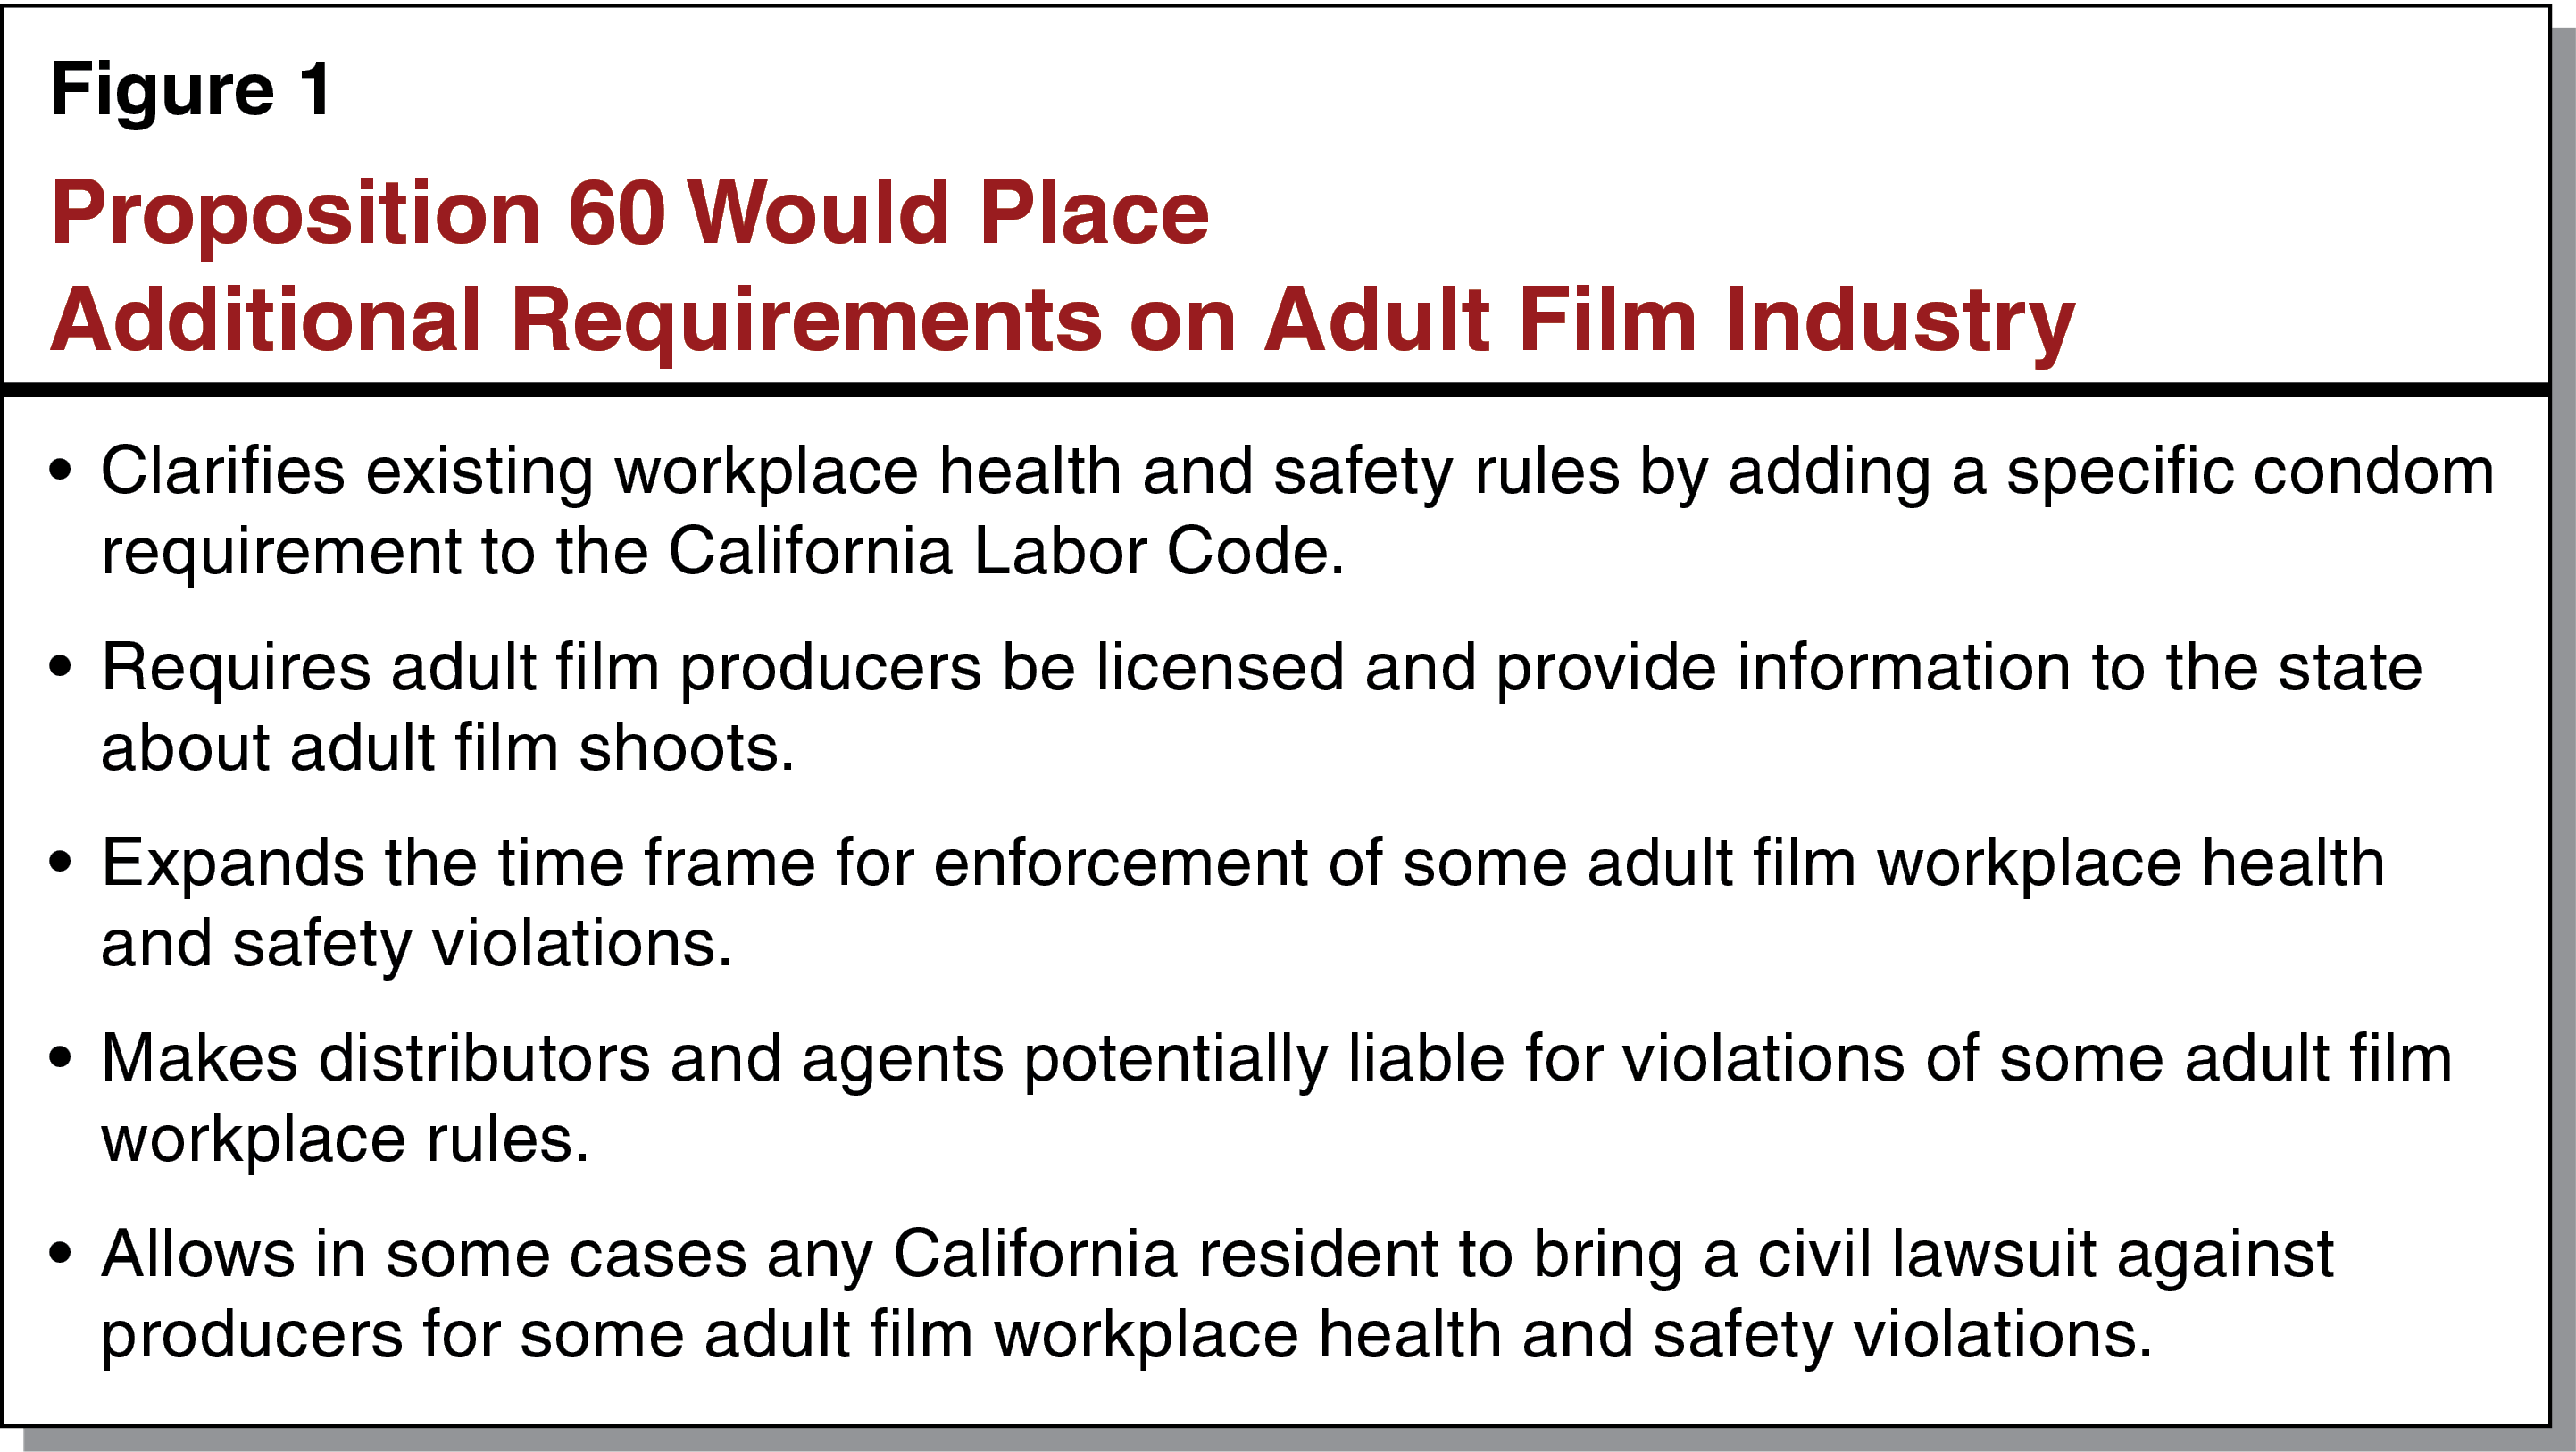 Figure 1 - Proposition 60 Would Place Additional Requirements on Adult Film Industry